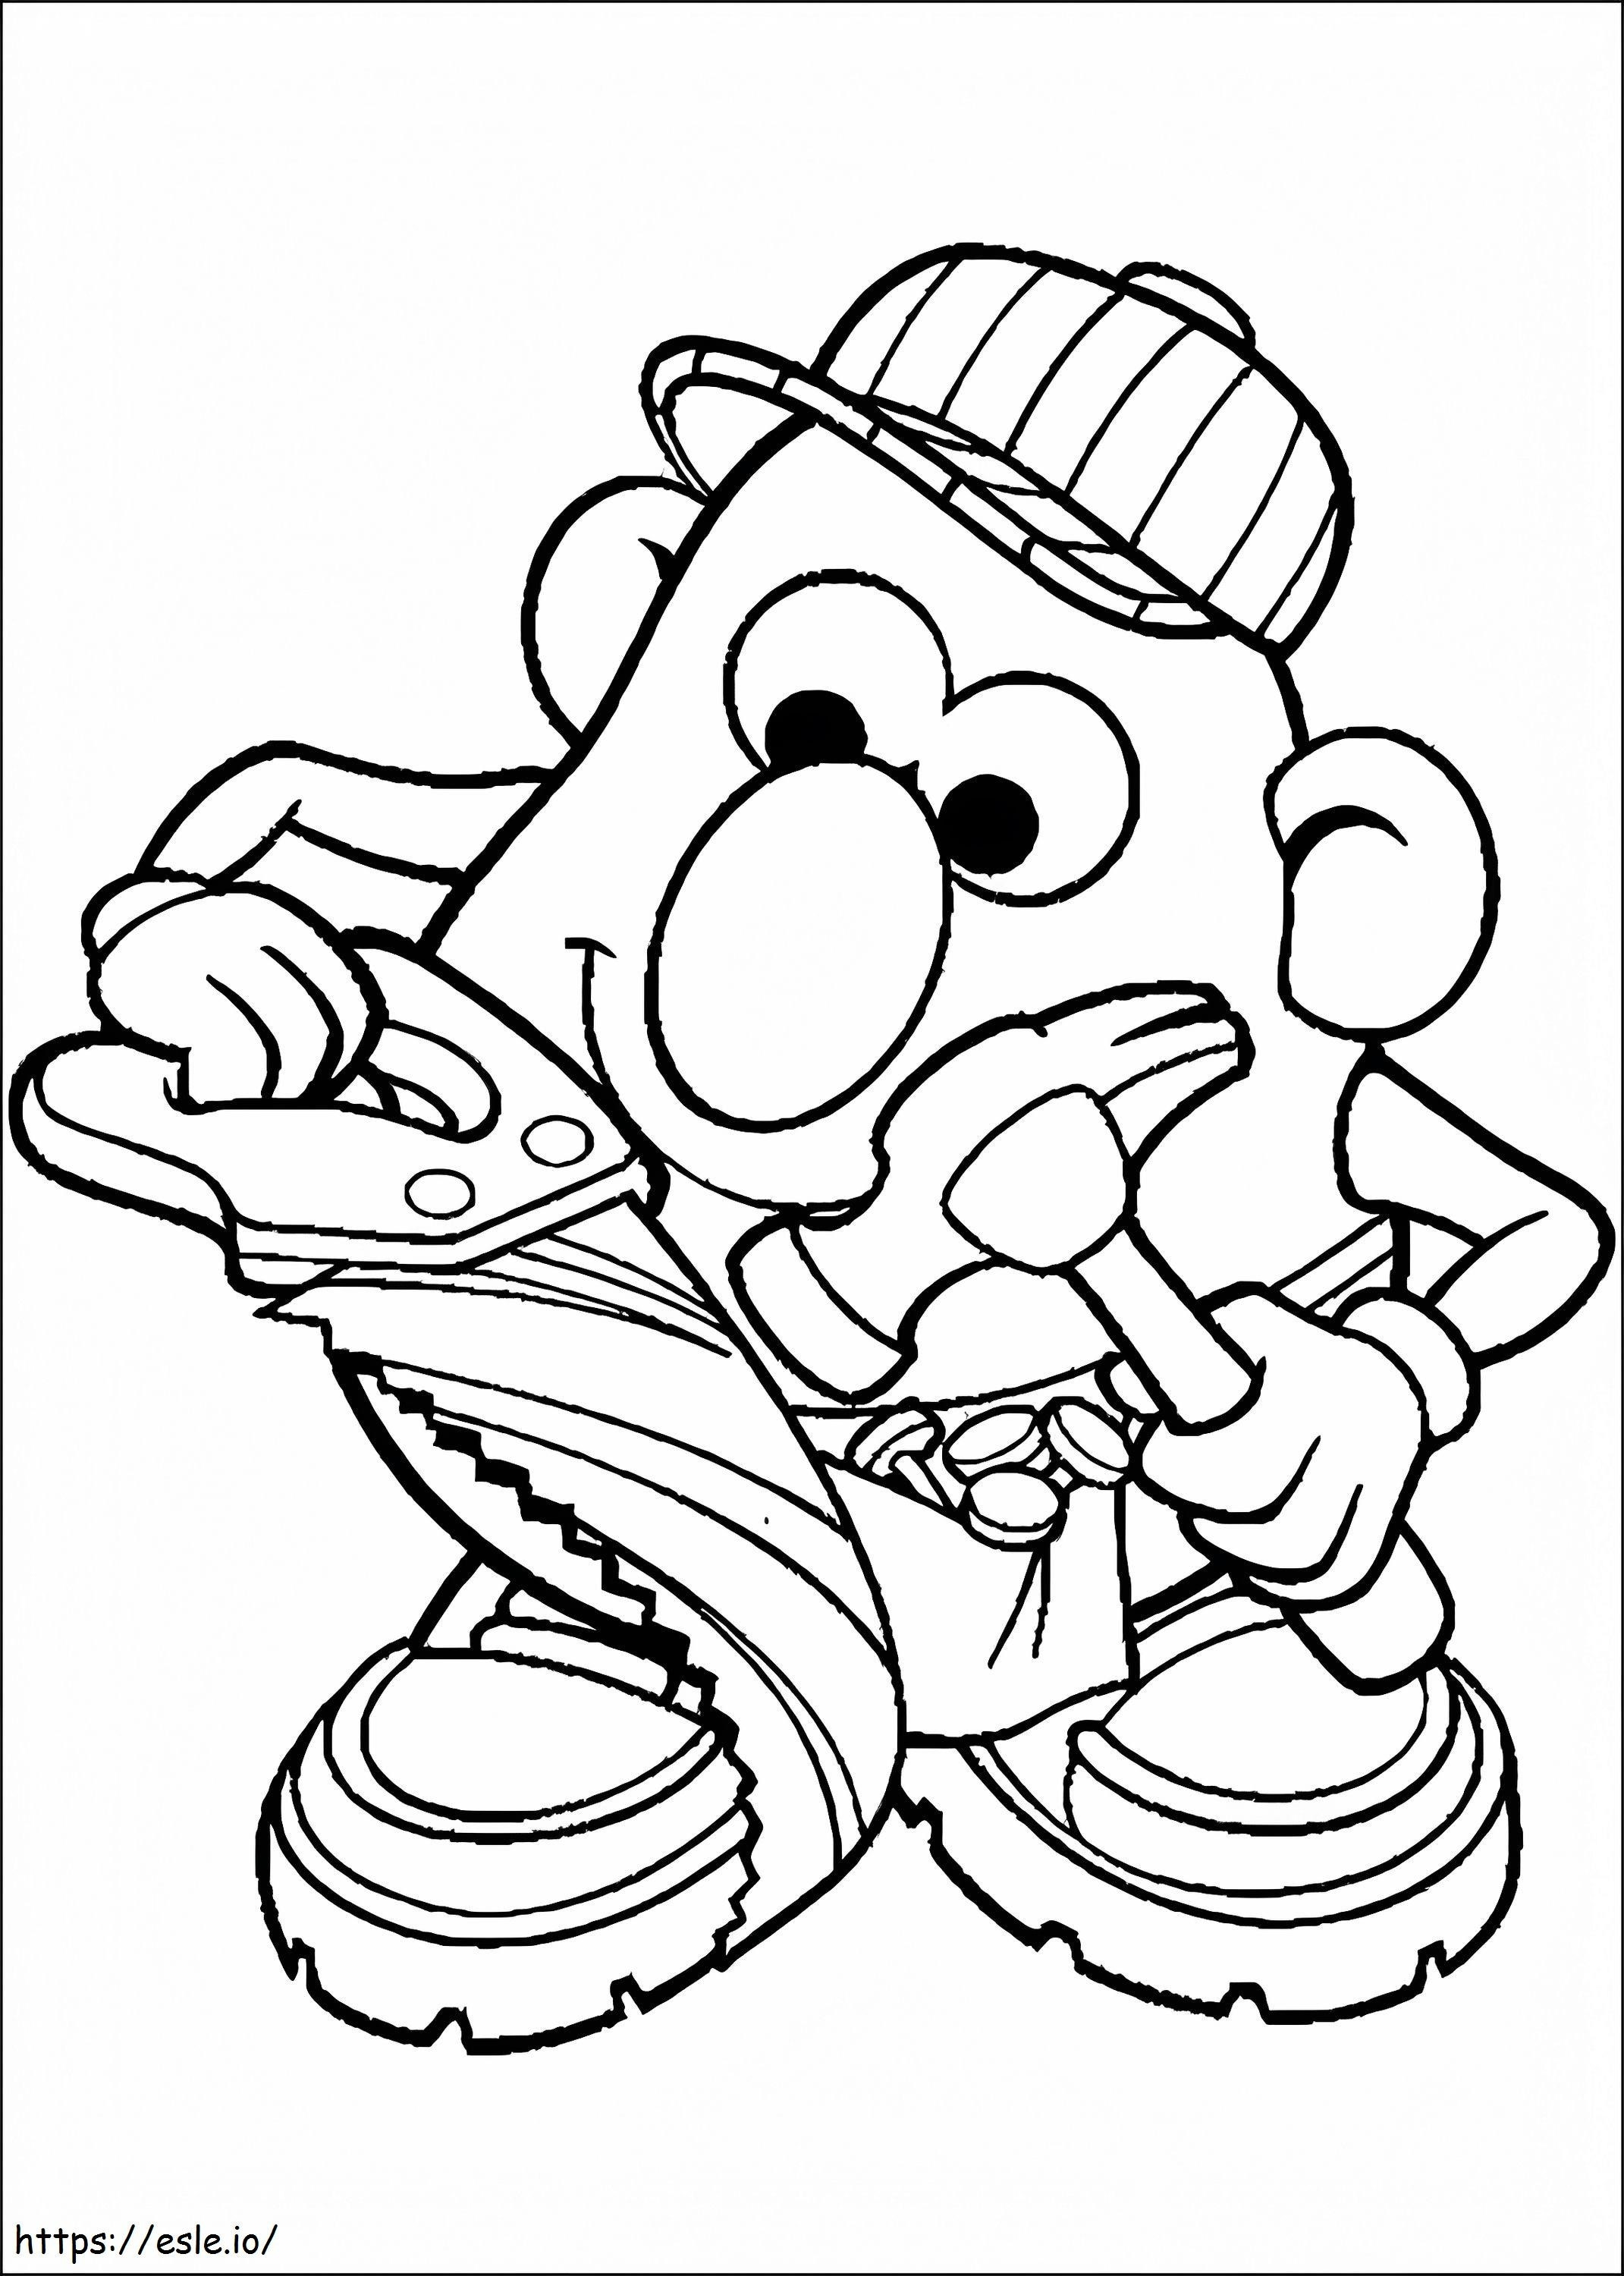 Mr. Potato Head Worker coloring page